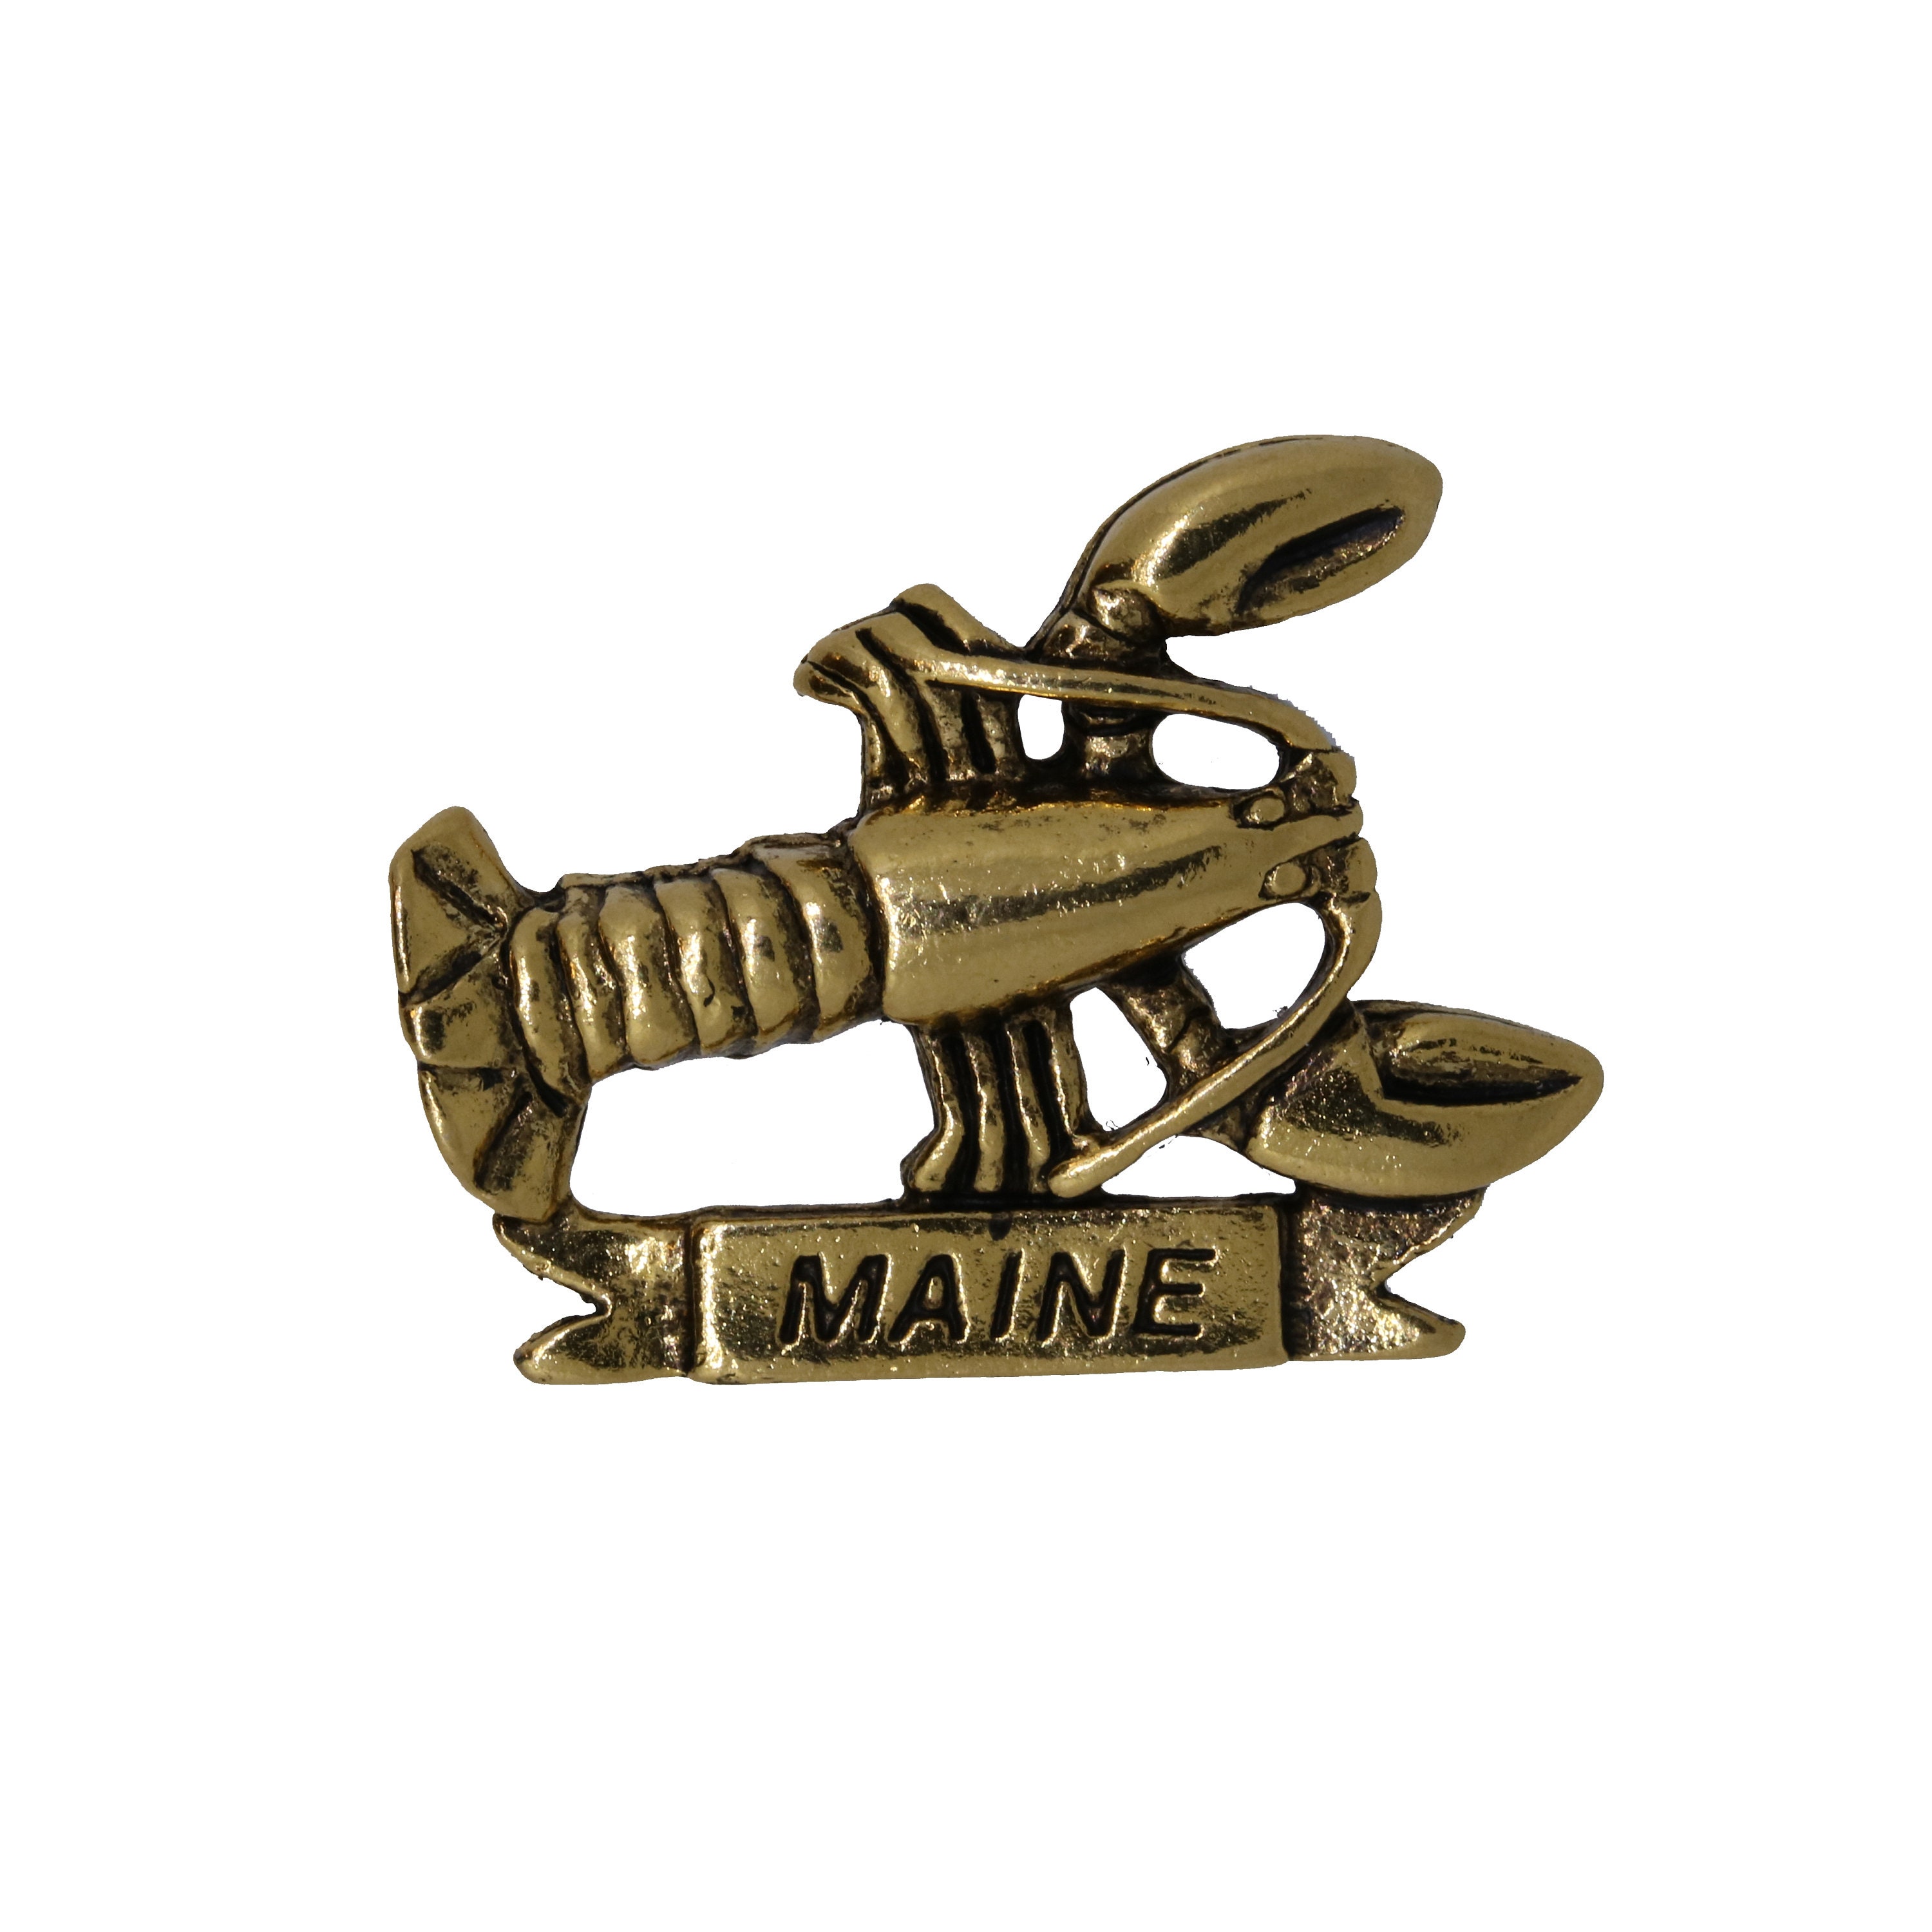 Maine Lobster Gold Dipped Pewter Lapel Pin - Cc130G - Maine, Lobster, & Seafood Pins